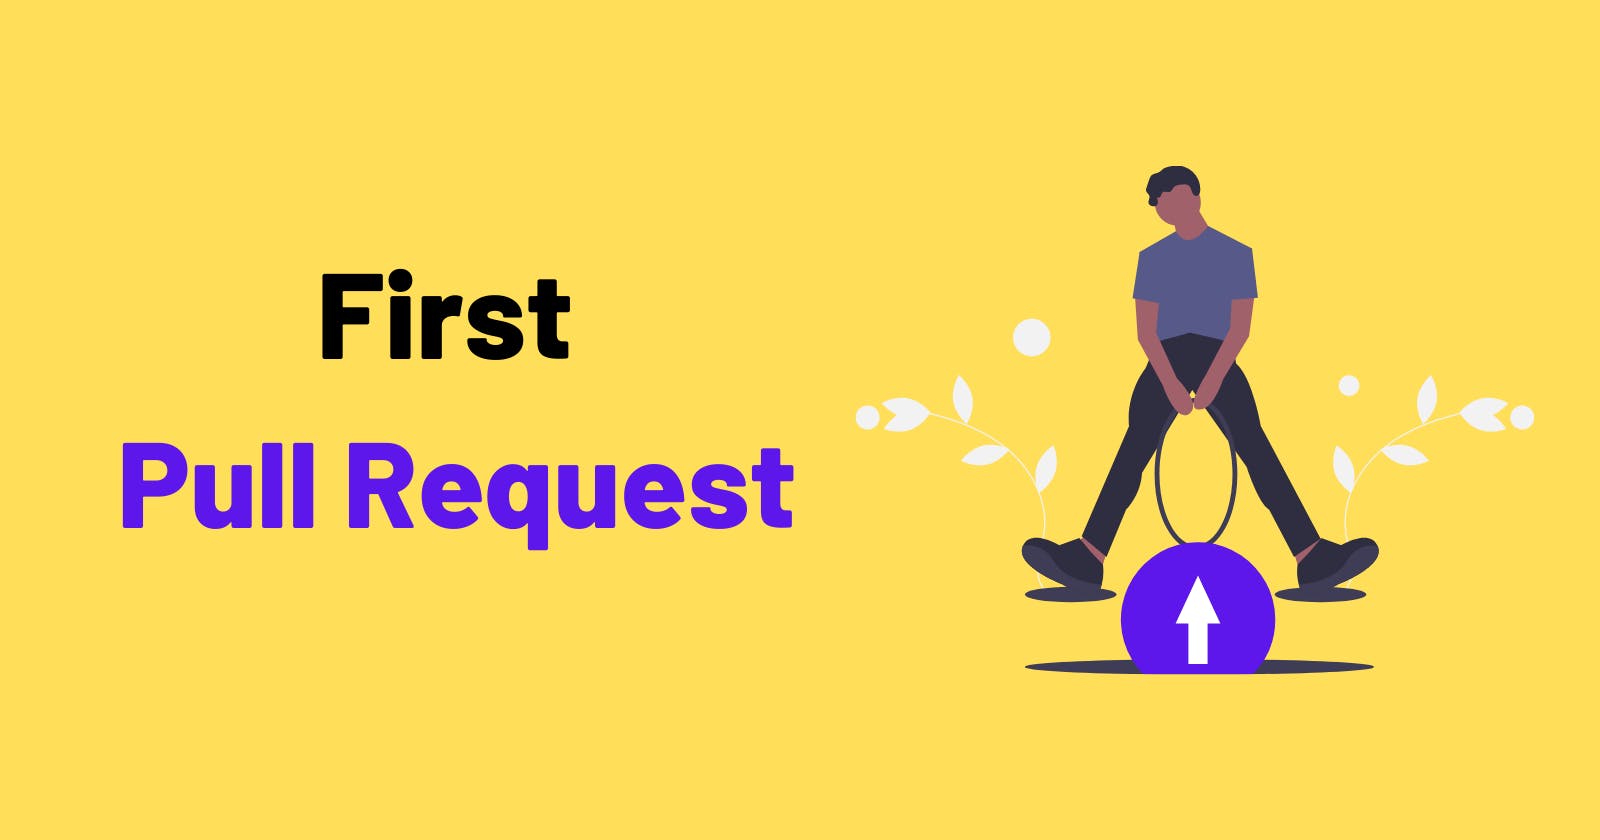 #3 First Pull Request